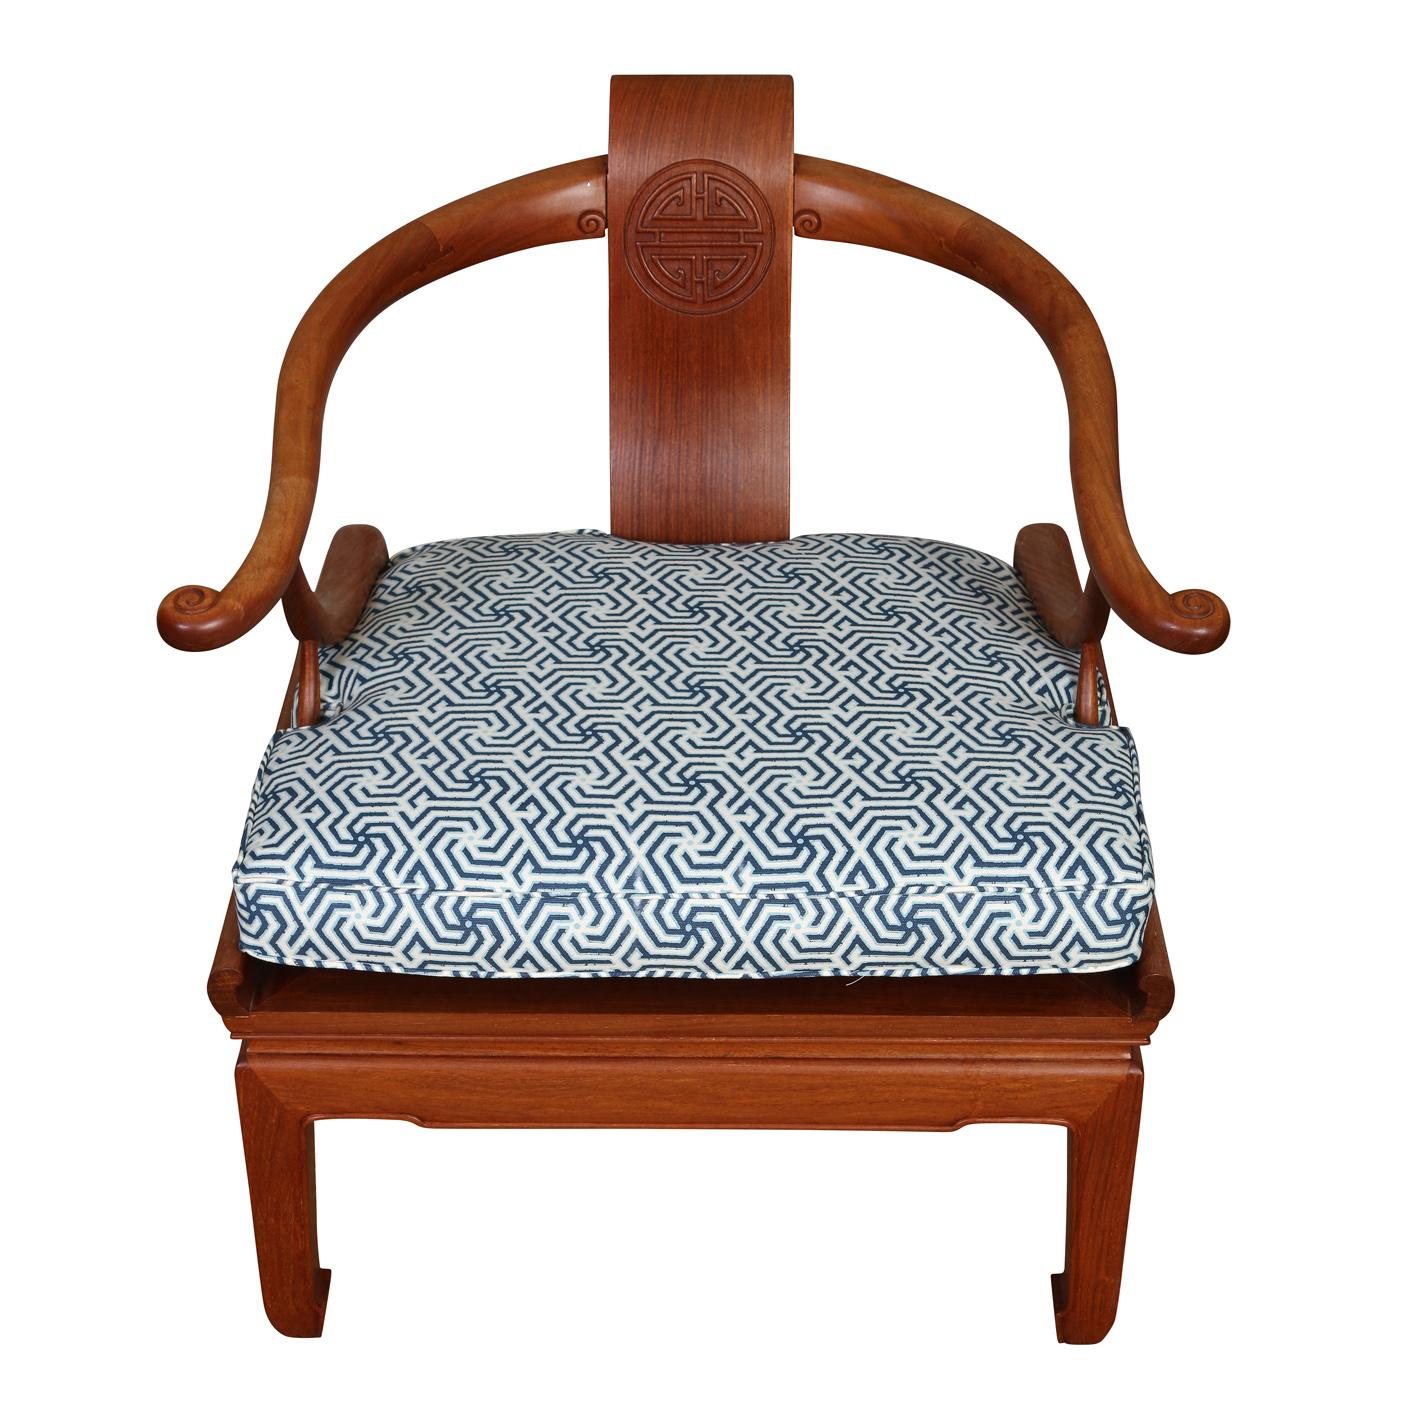 A pair of vintage teakwood Asian horseshoe arm chairs with newly upholstered geometric blue and white seat cushions and carved vertical single panel back.